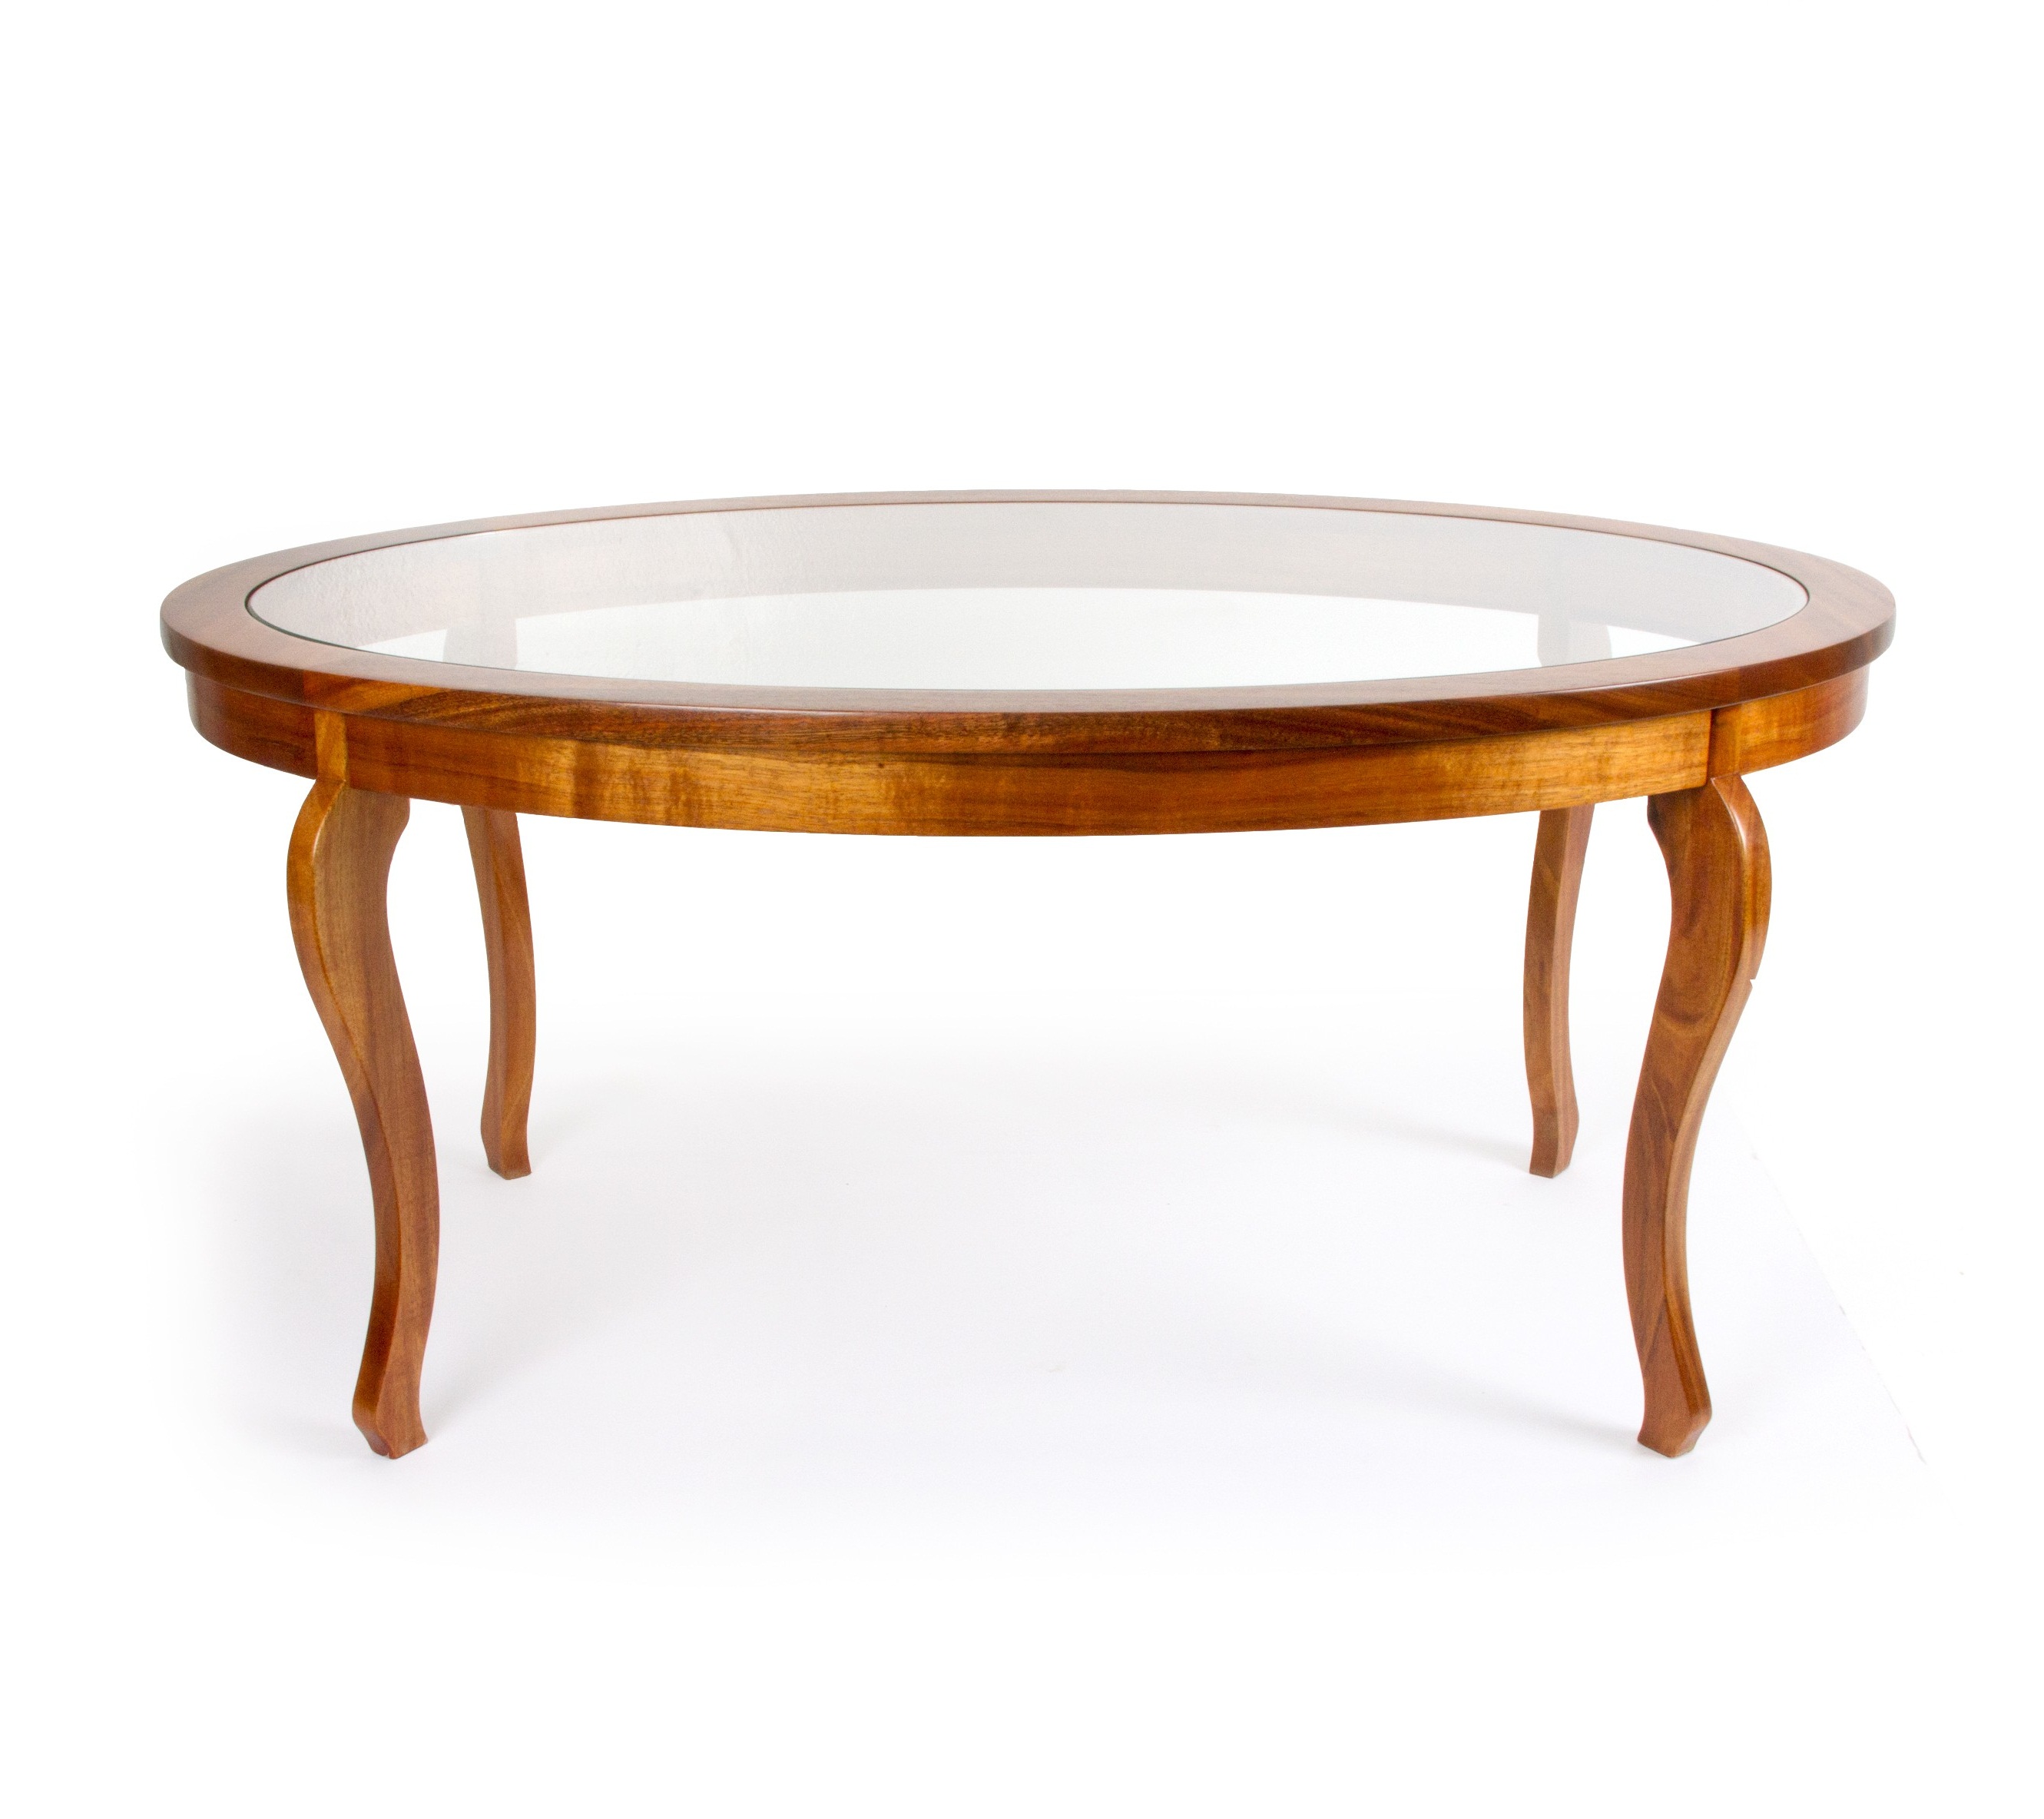 coffee tables ideas top glass table replacement additional feauture amazing cool decoration interior design transparant handmade circular round shape end travertine magnolia